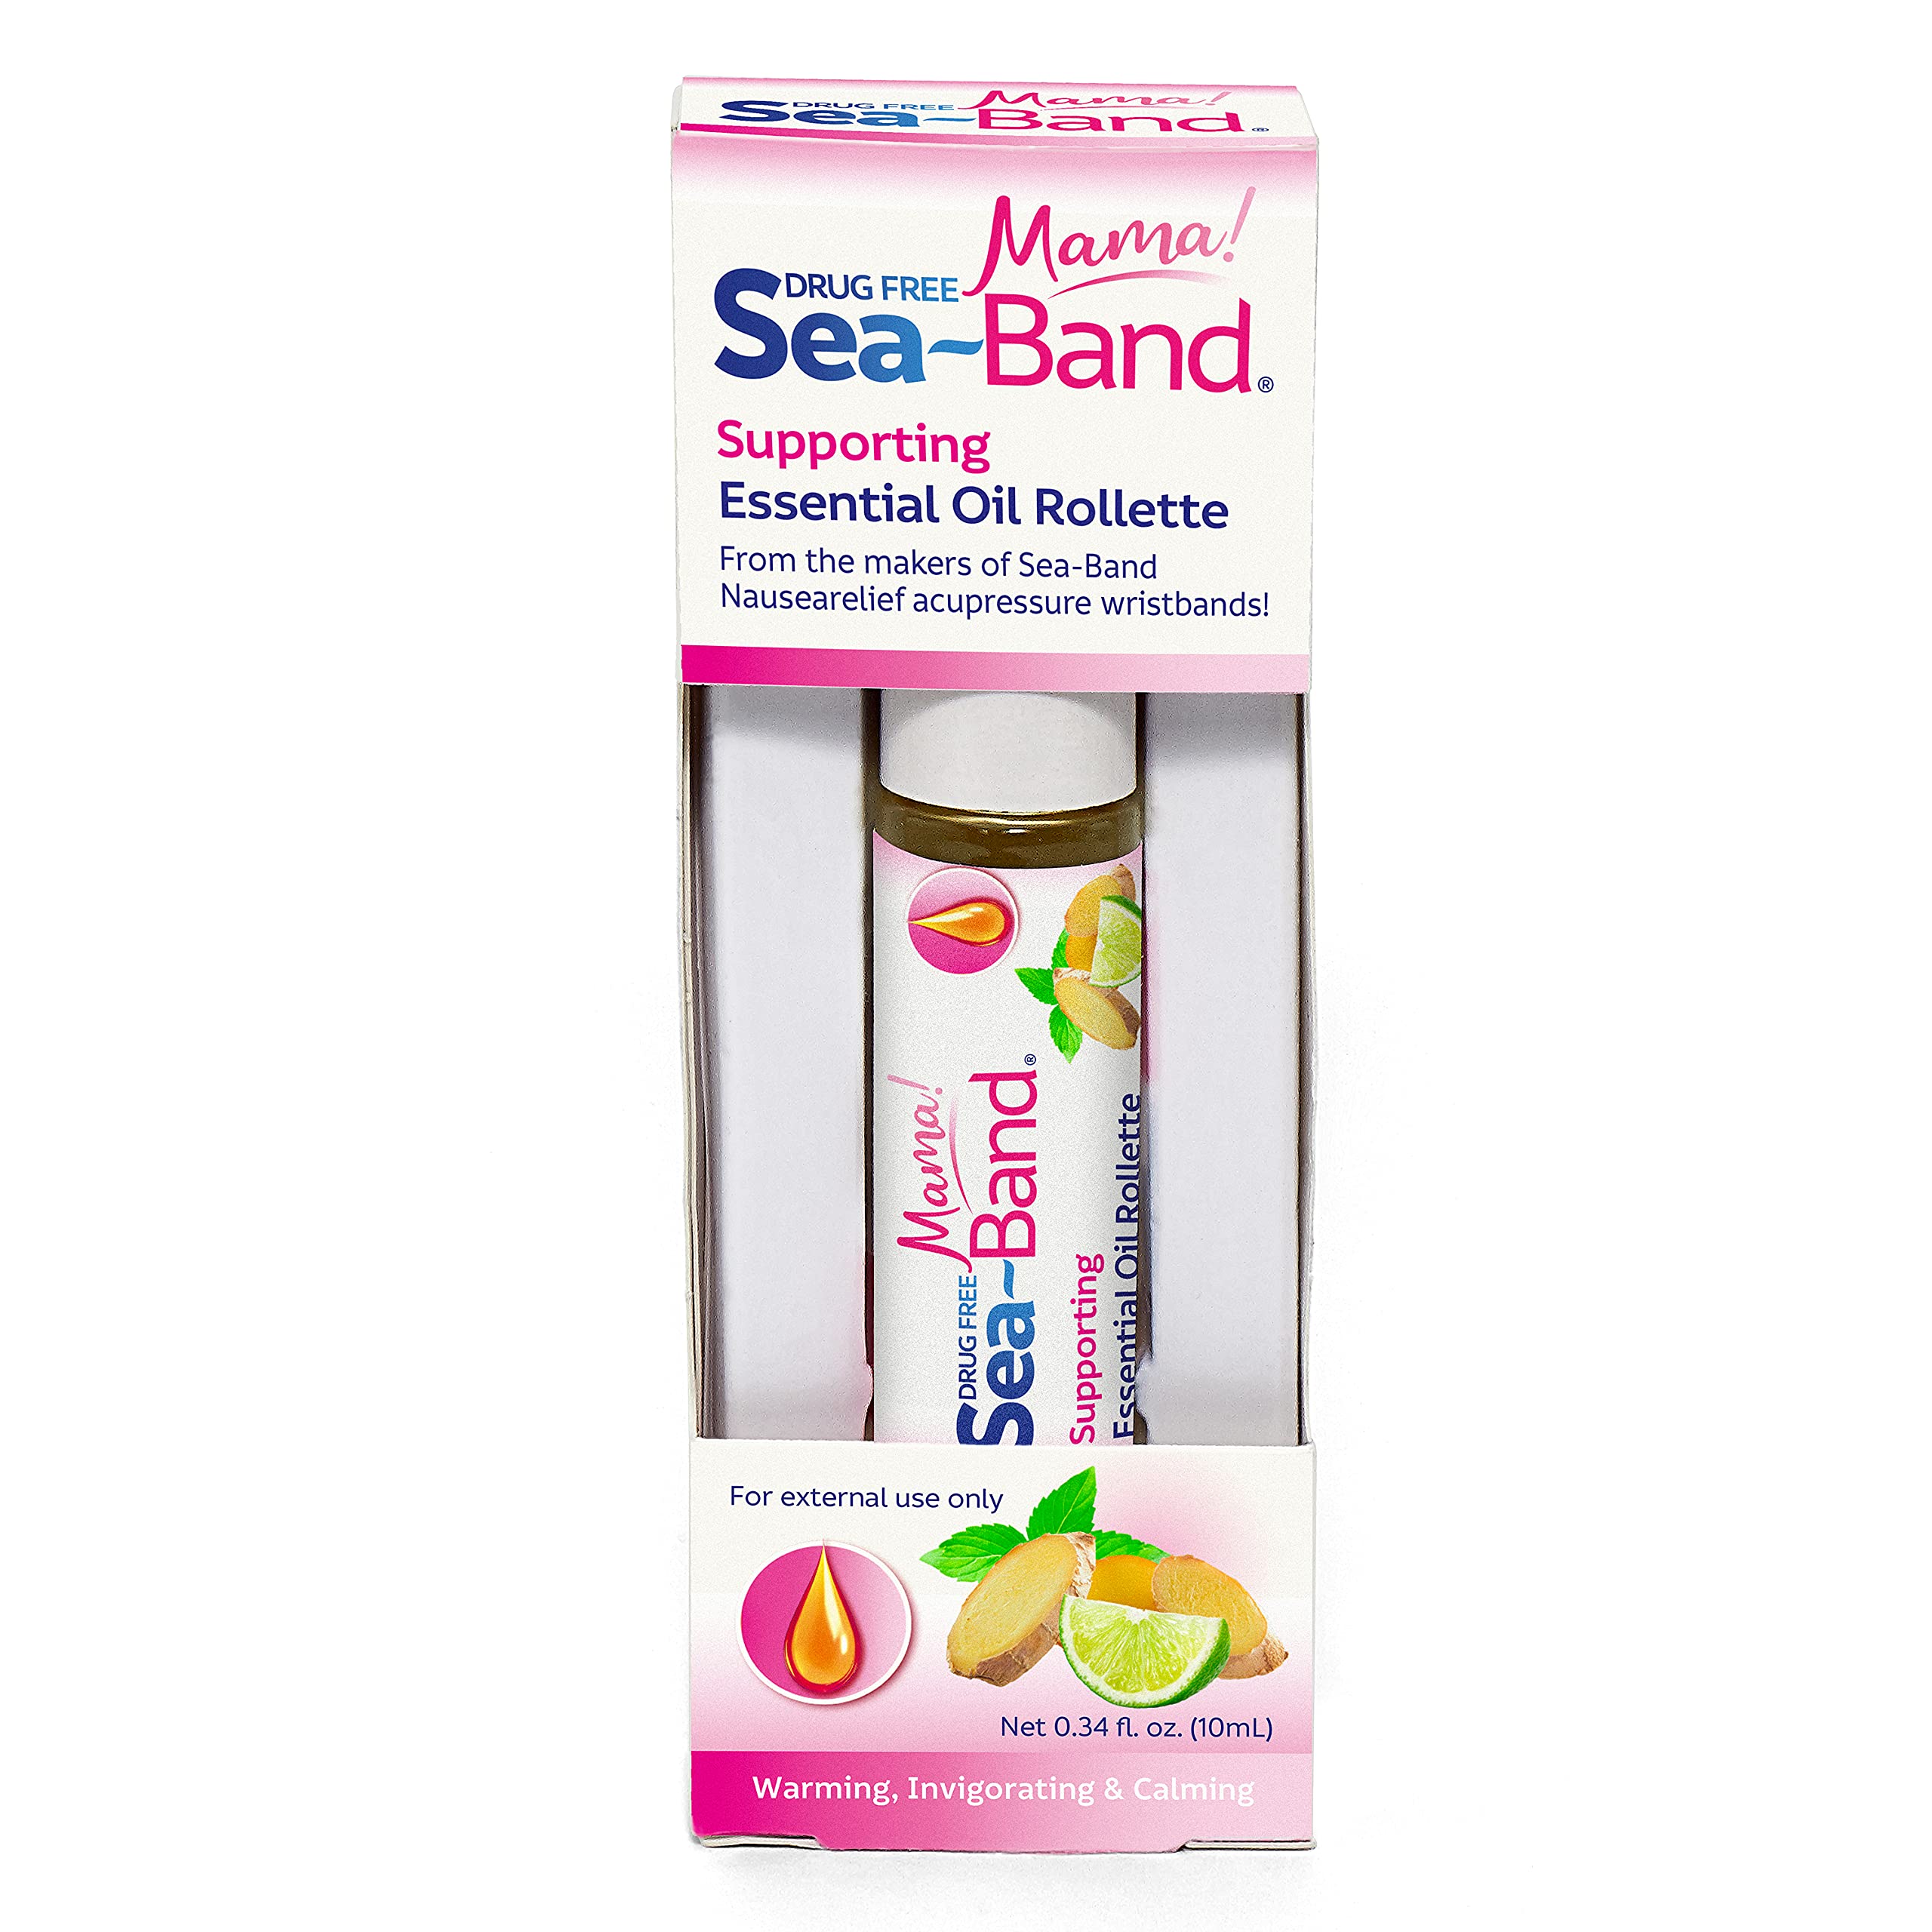 Sea-Band Mama! Anti-Nausea Aromatherapy Rollette with Essential Oils for Pregnancy Morning Sickness